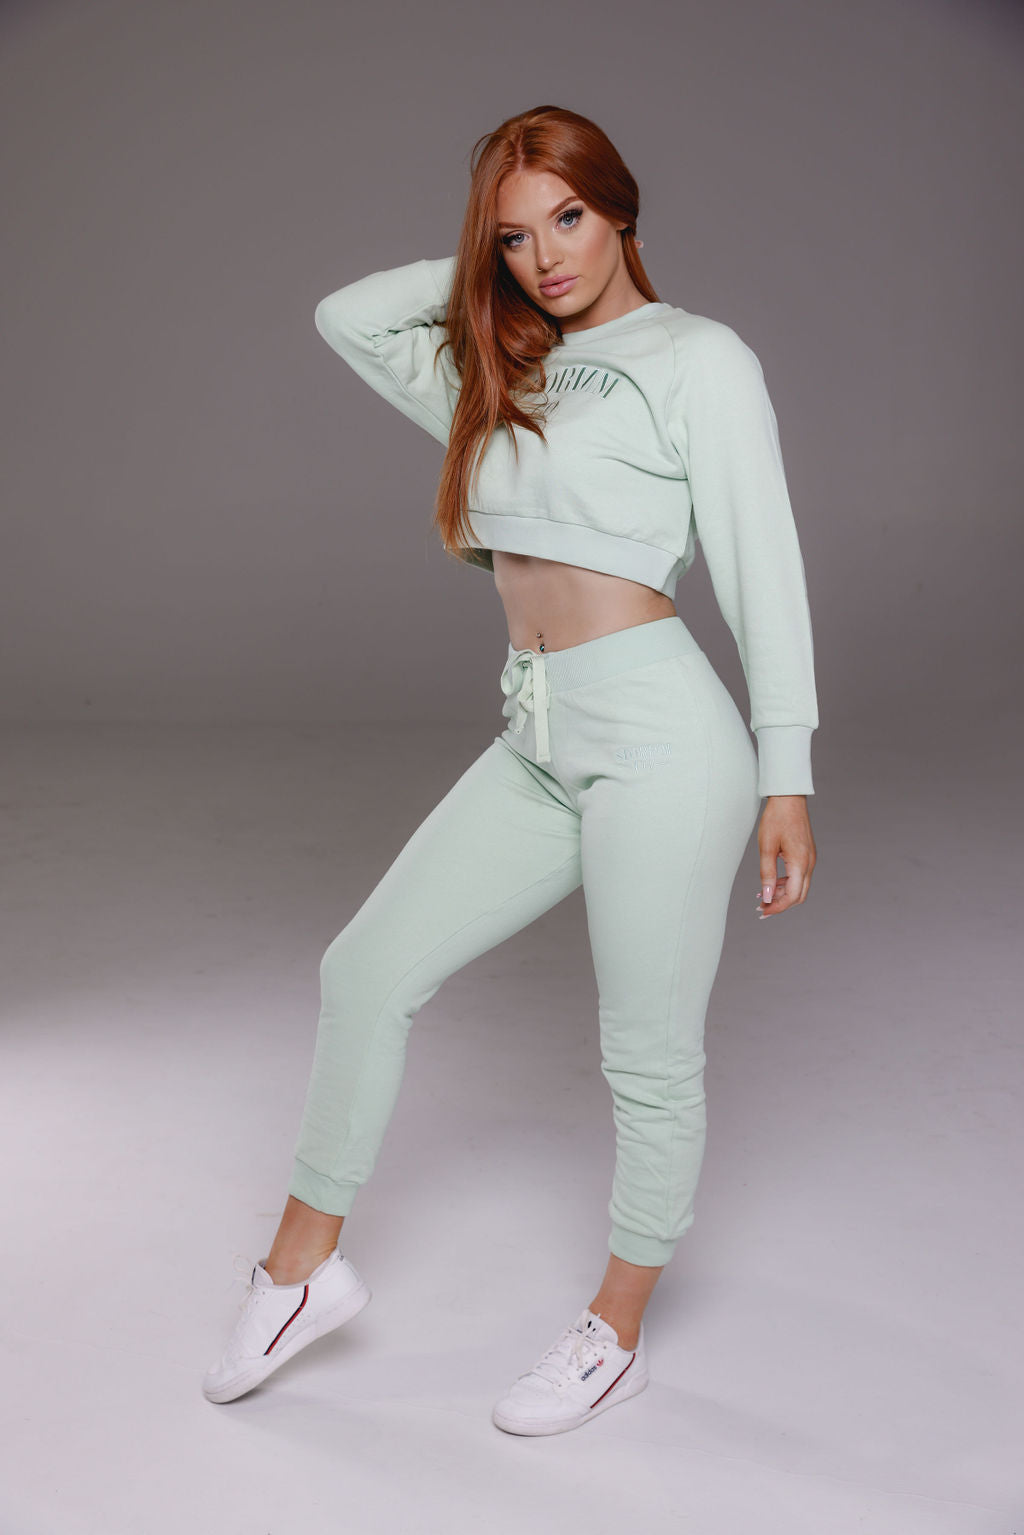 Cropped jumper in mint from Stormm Co's Hues of Happiness collection, made from soft French terry cotton, relaxed fit, and embroidered unique design.